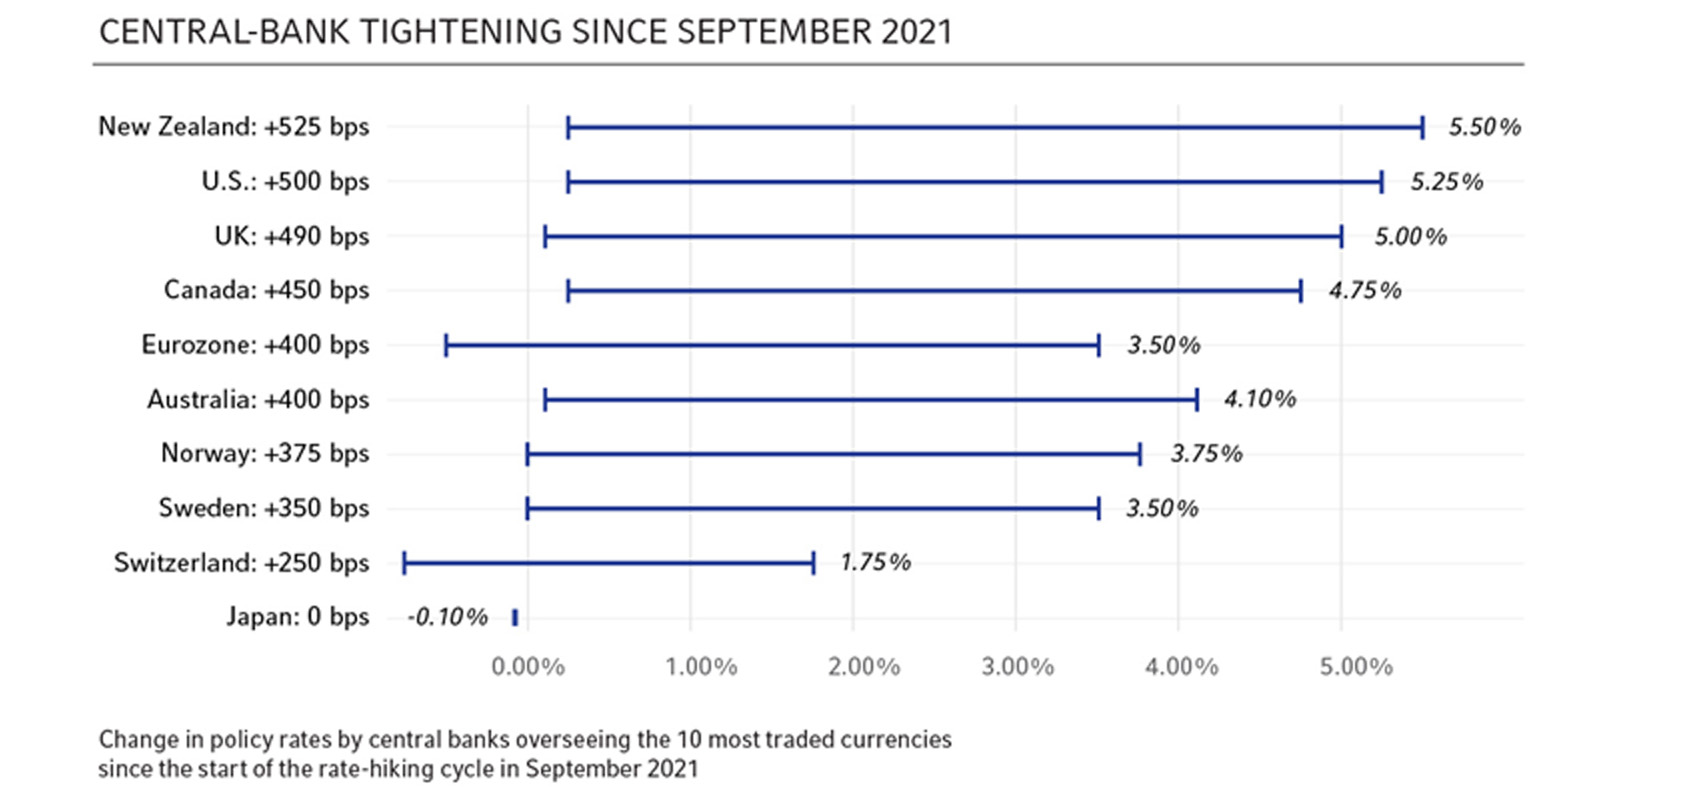 Graphic showing central bank tightening since September 2021